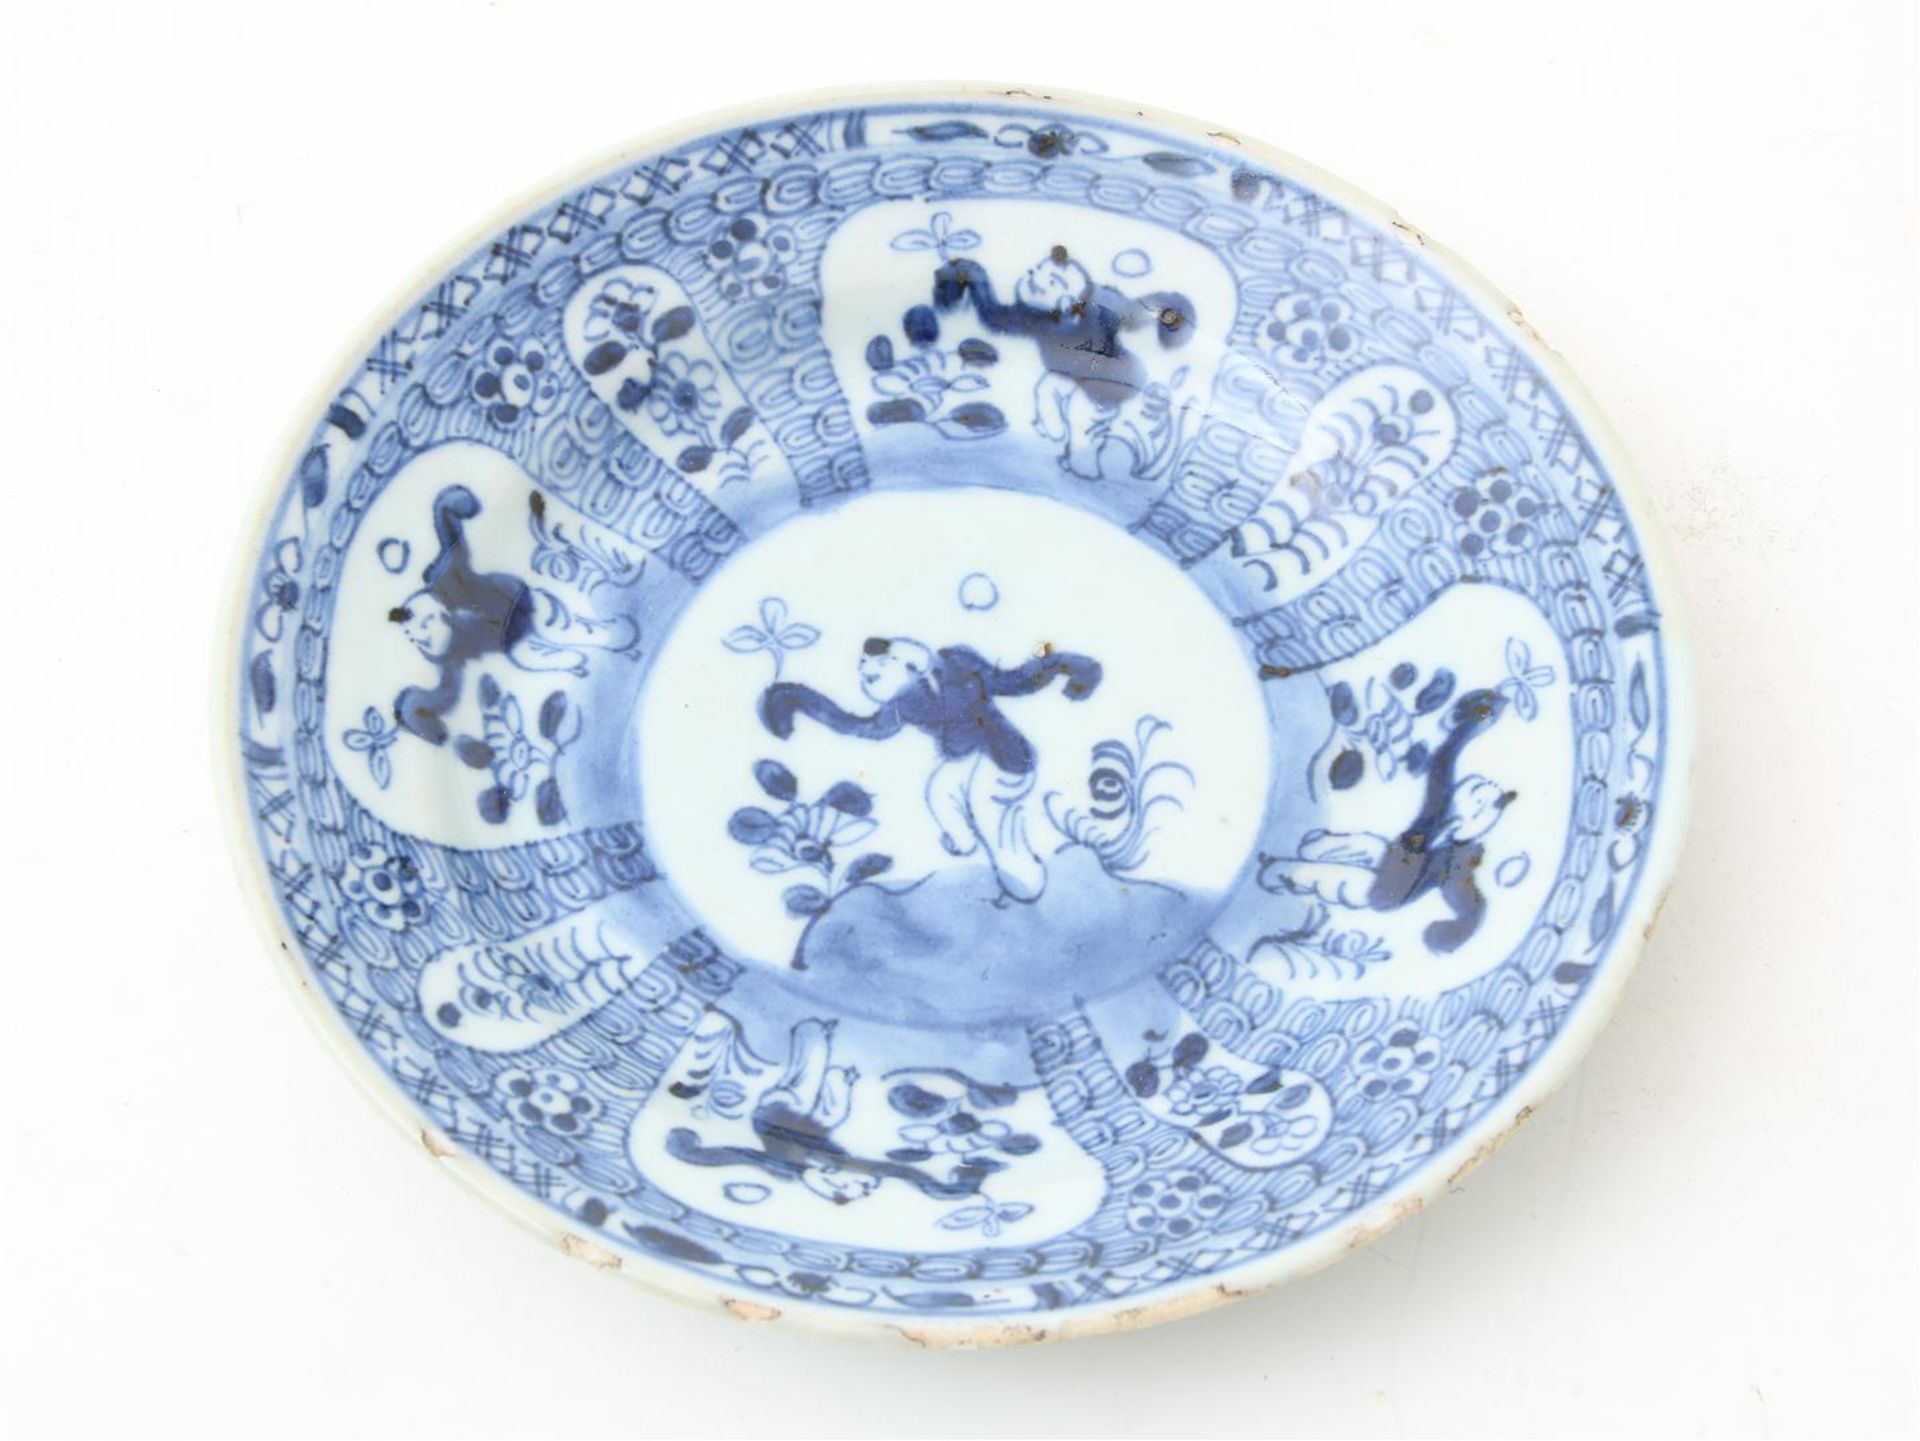 Series of 5 porcelain plates, China 19th century - Image 3 of 9